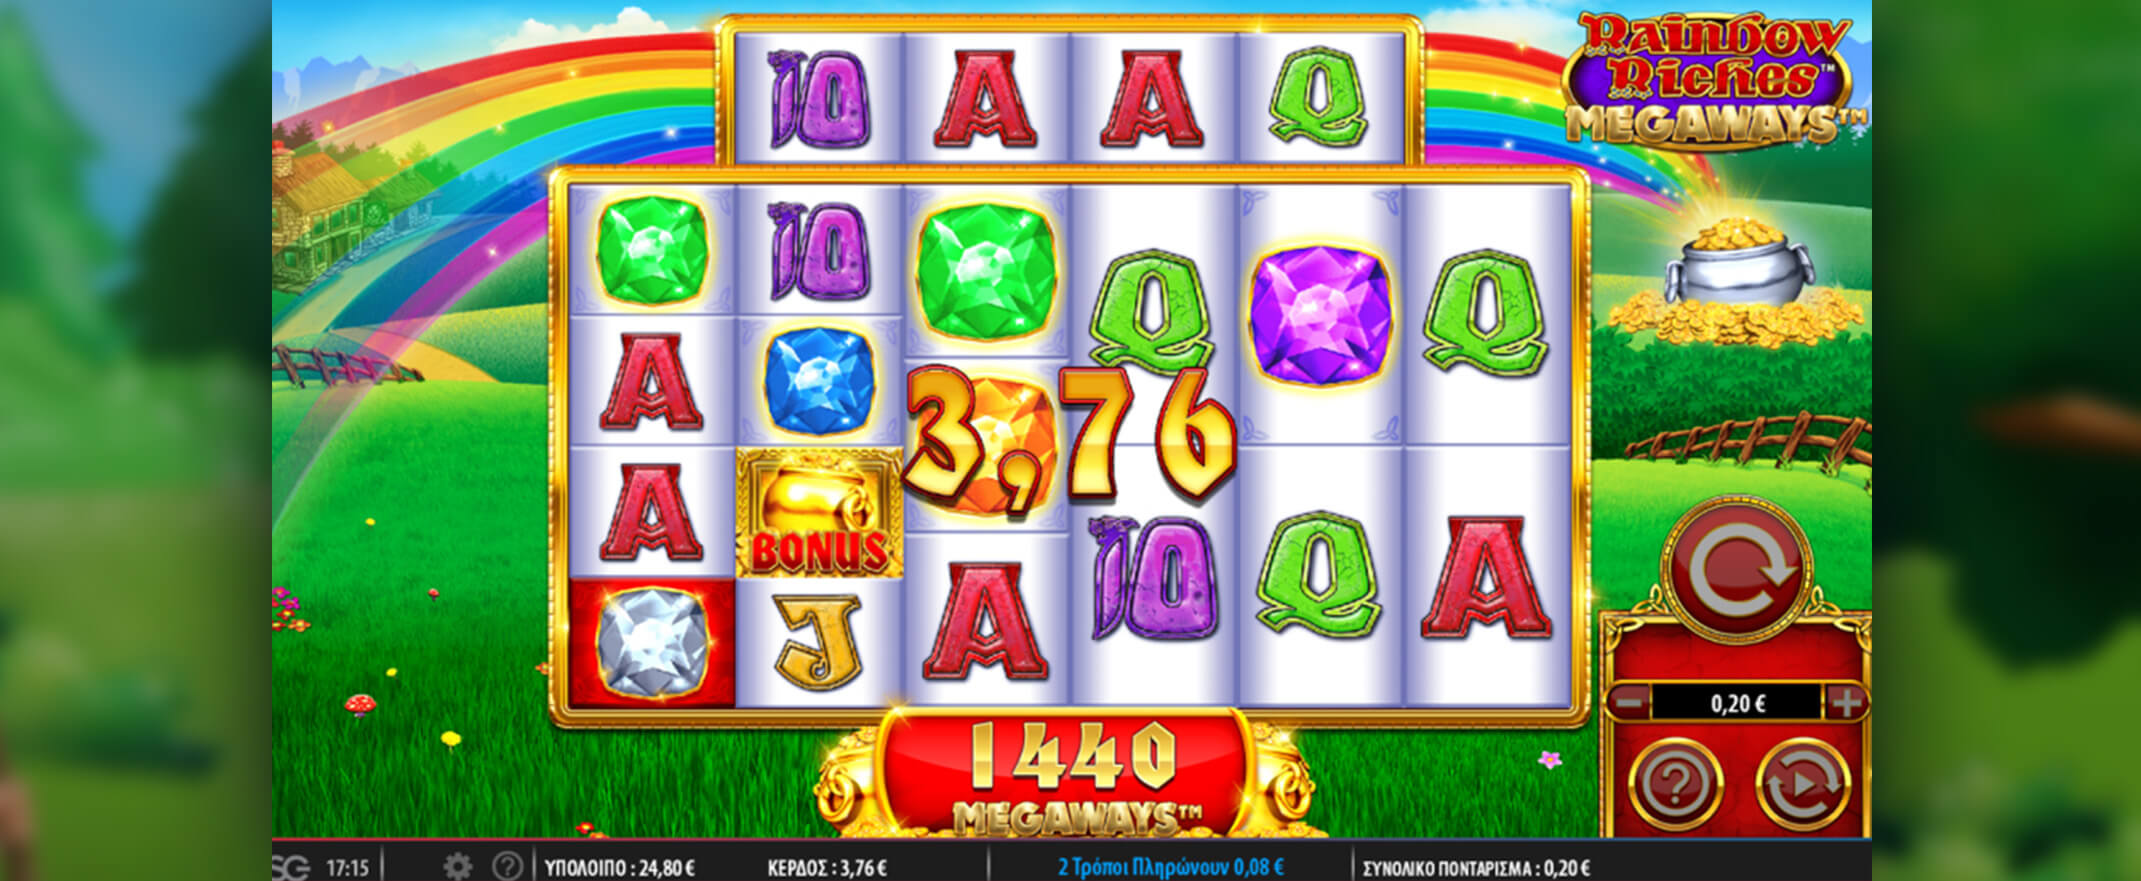 Rainbow Riches slot - image of the reels